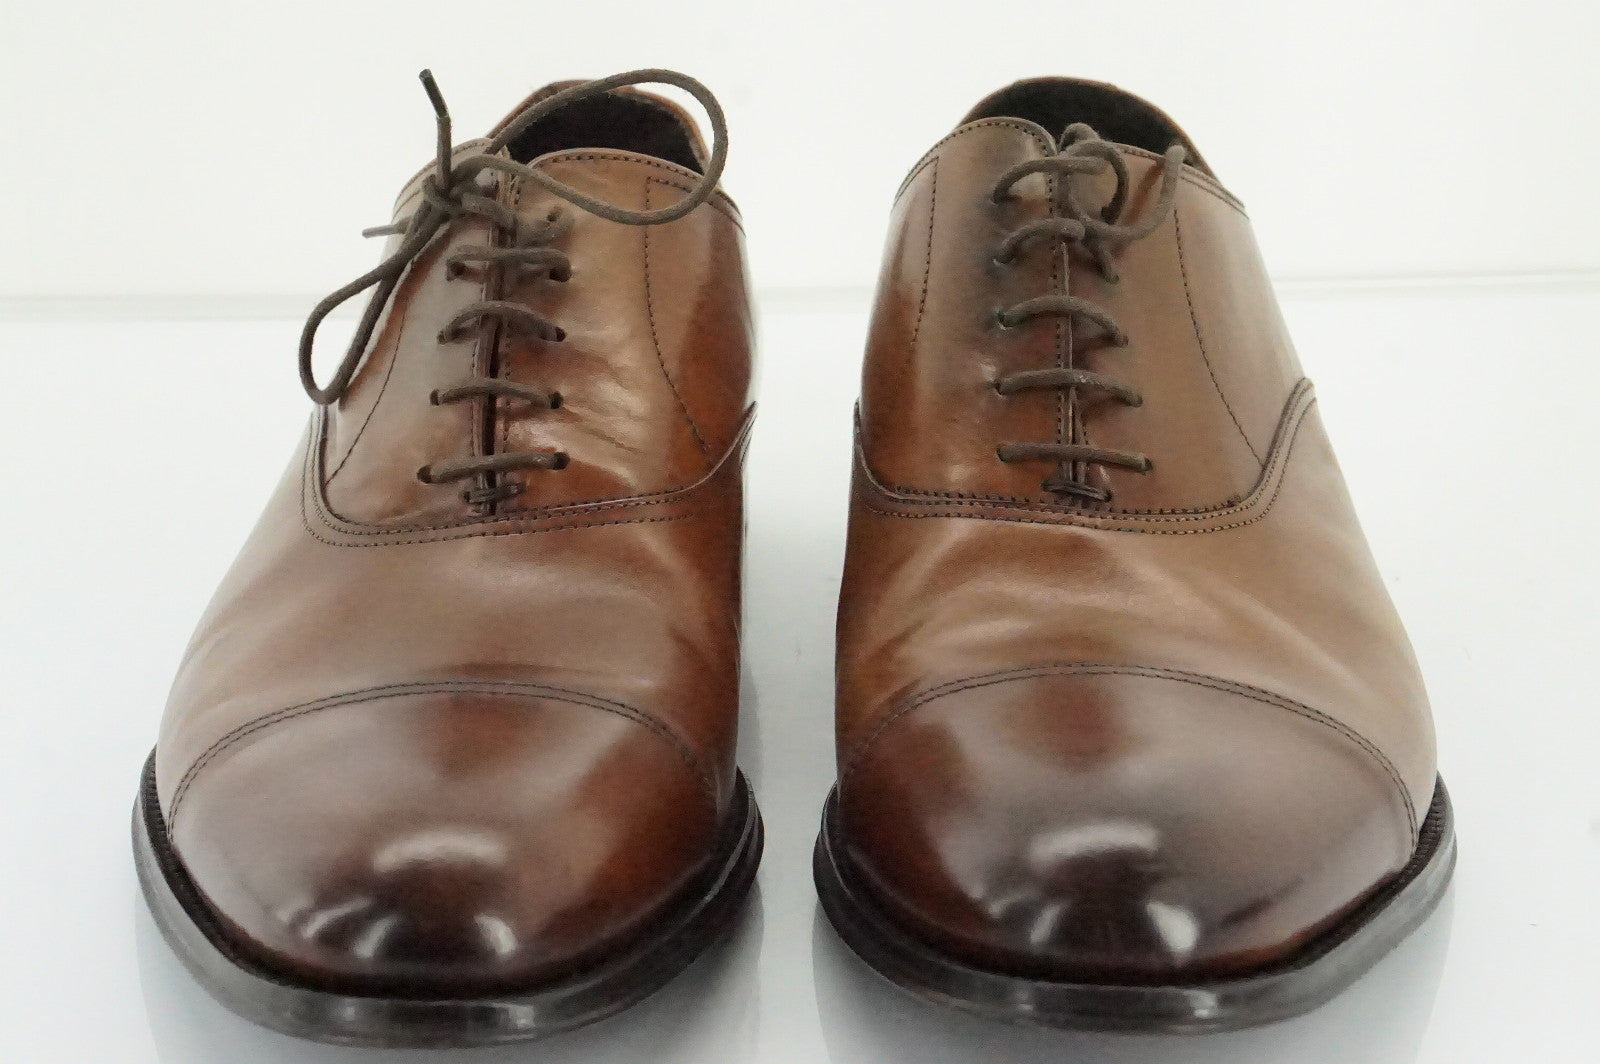 To Boot New York Brown Leather 'Aidan' Cap Toe Oxfords Size 11.5 US Mens $395